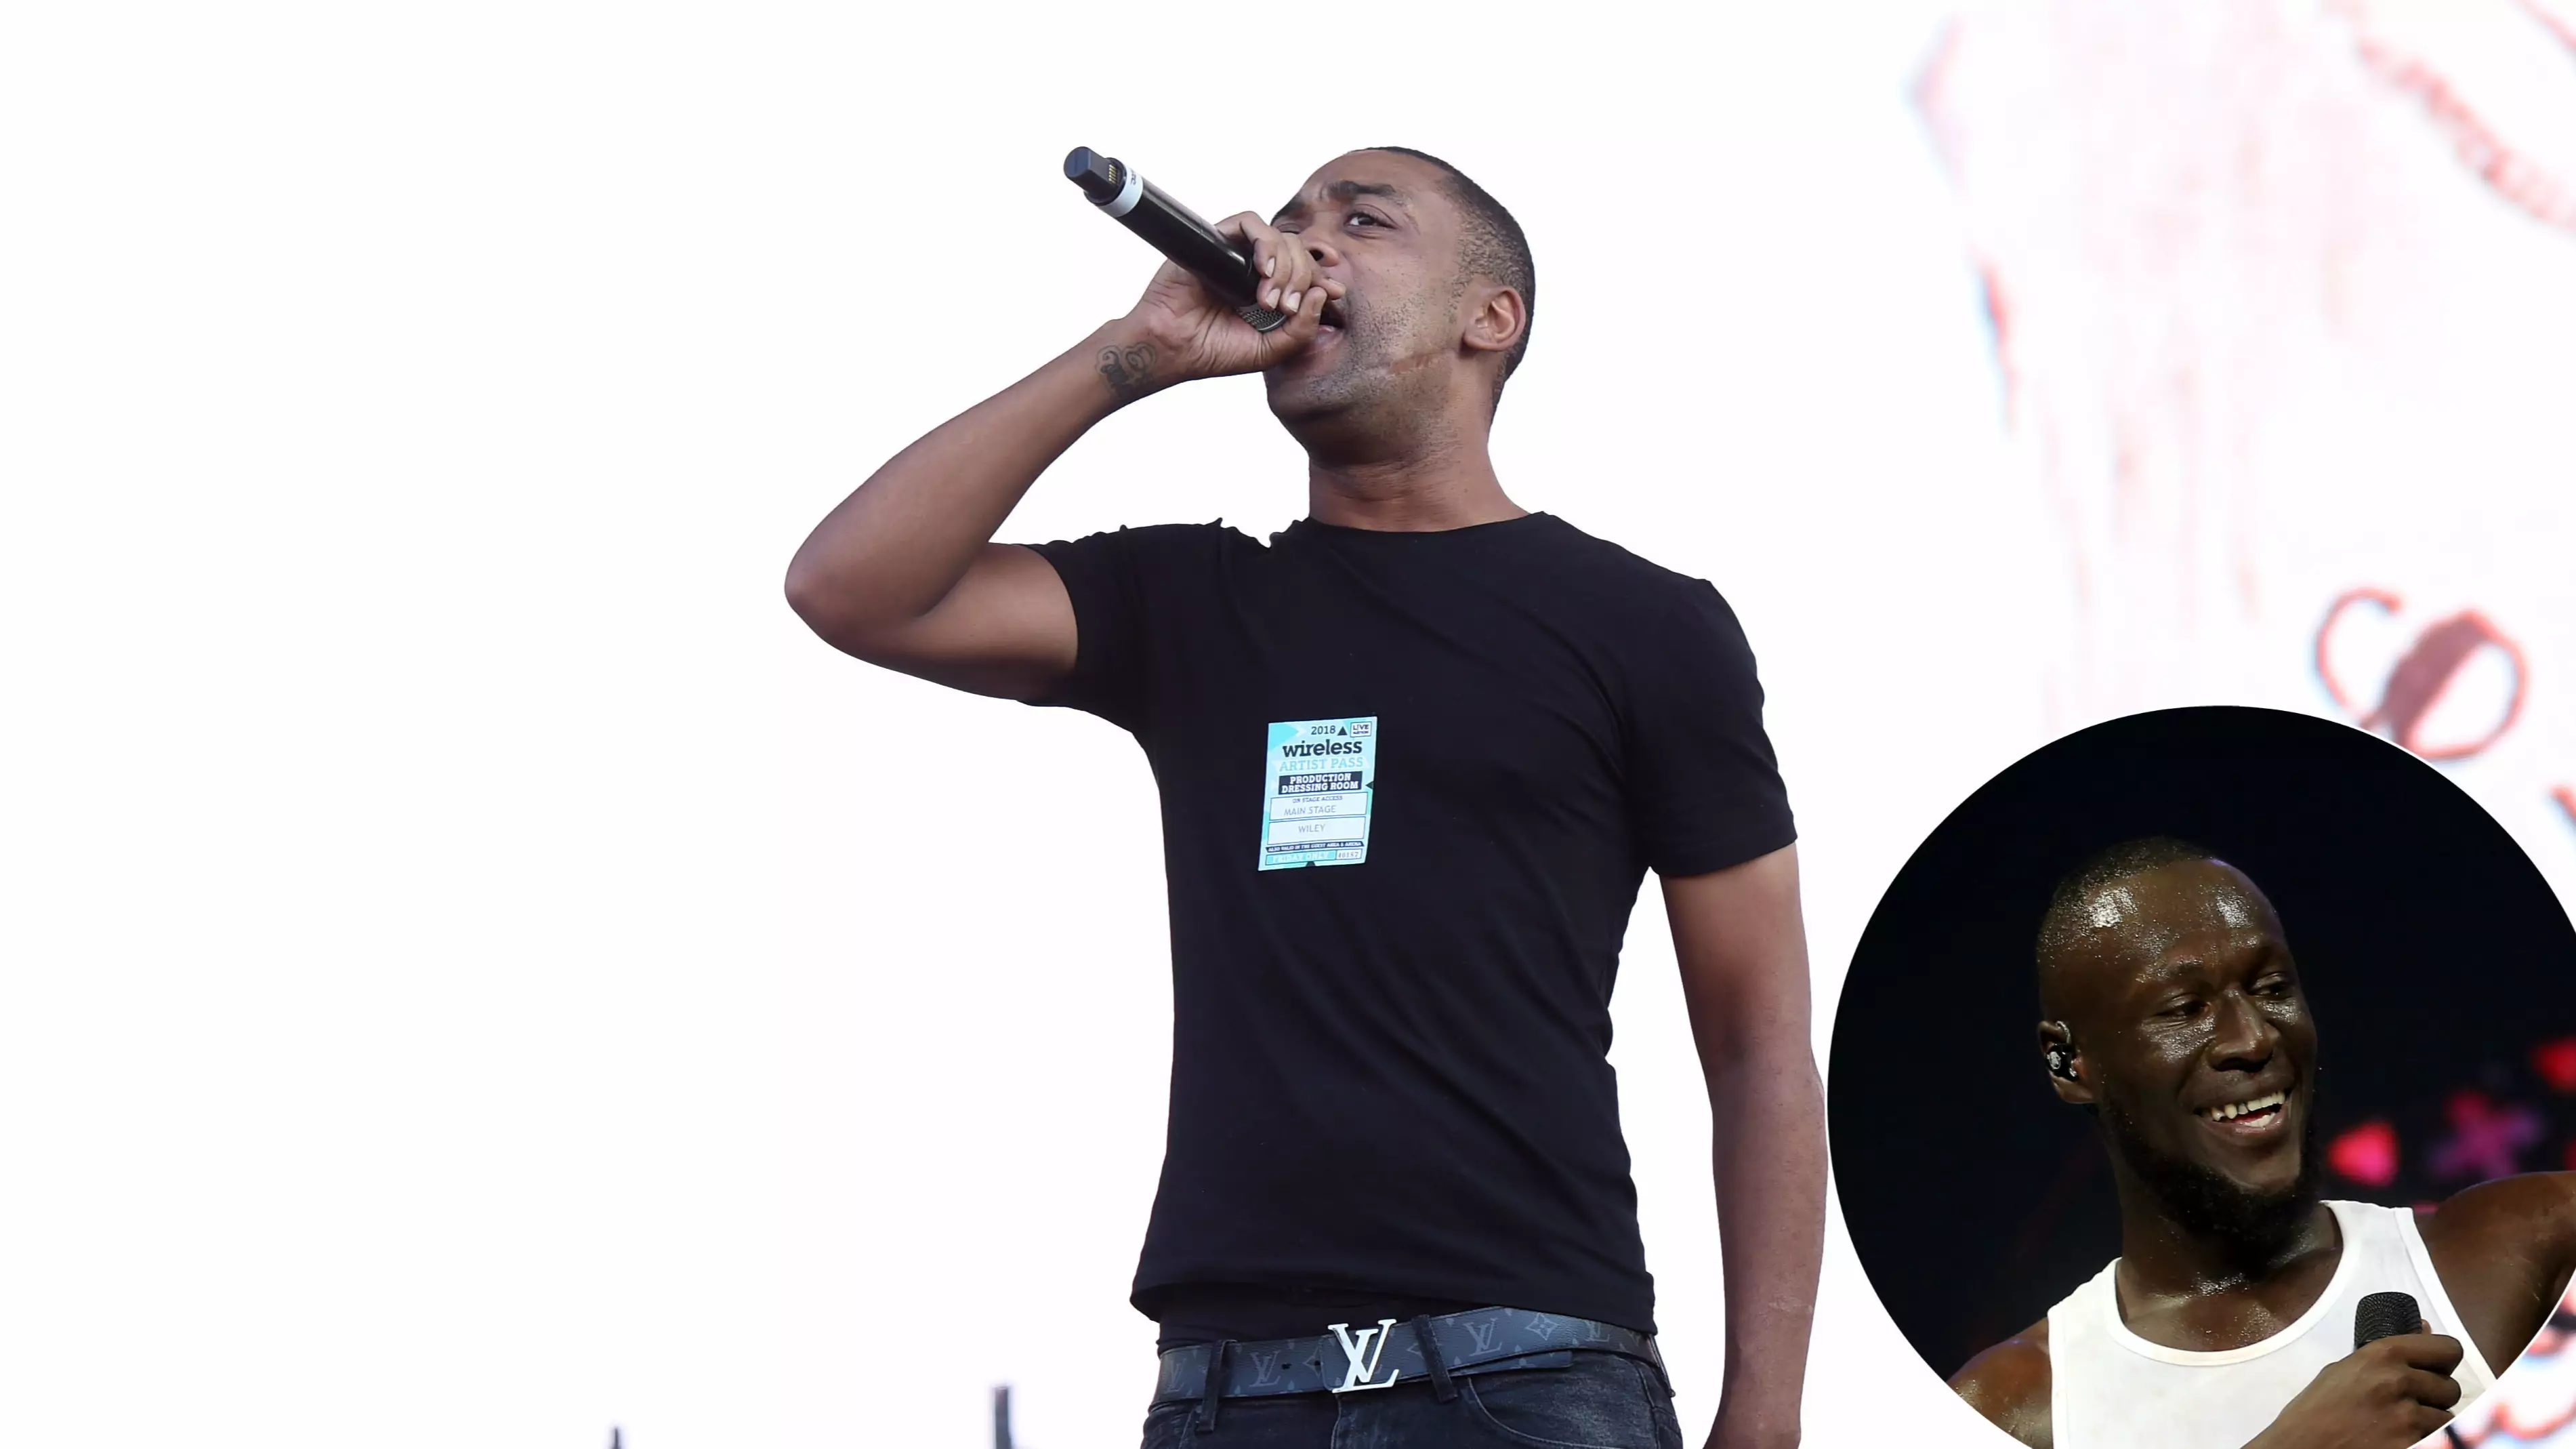 Wiley Threatens Stormzy's Mum In Latest Diss Track Of Ongoing Feud 